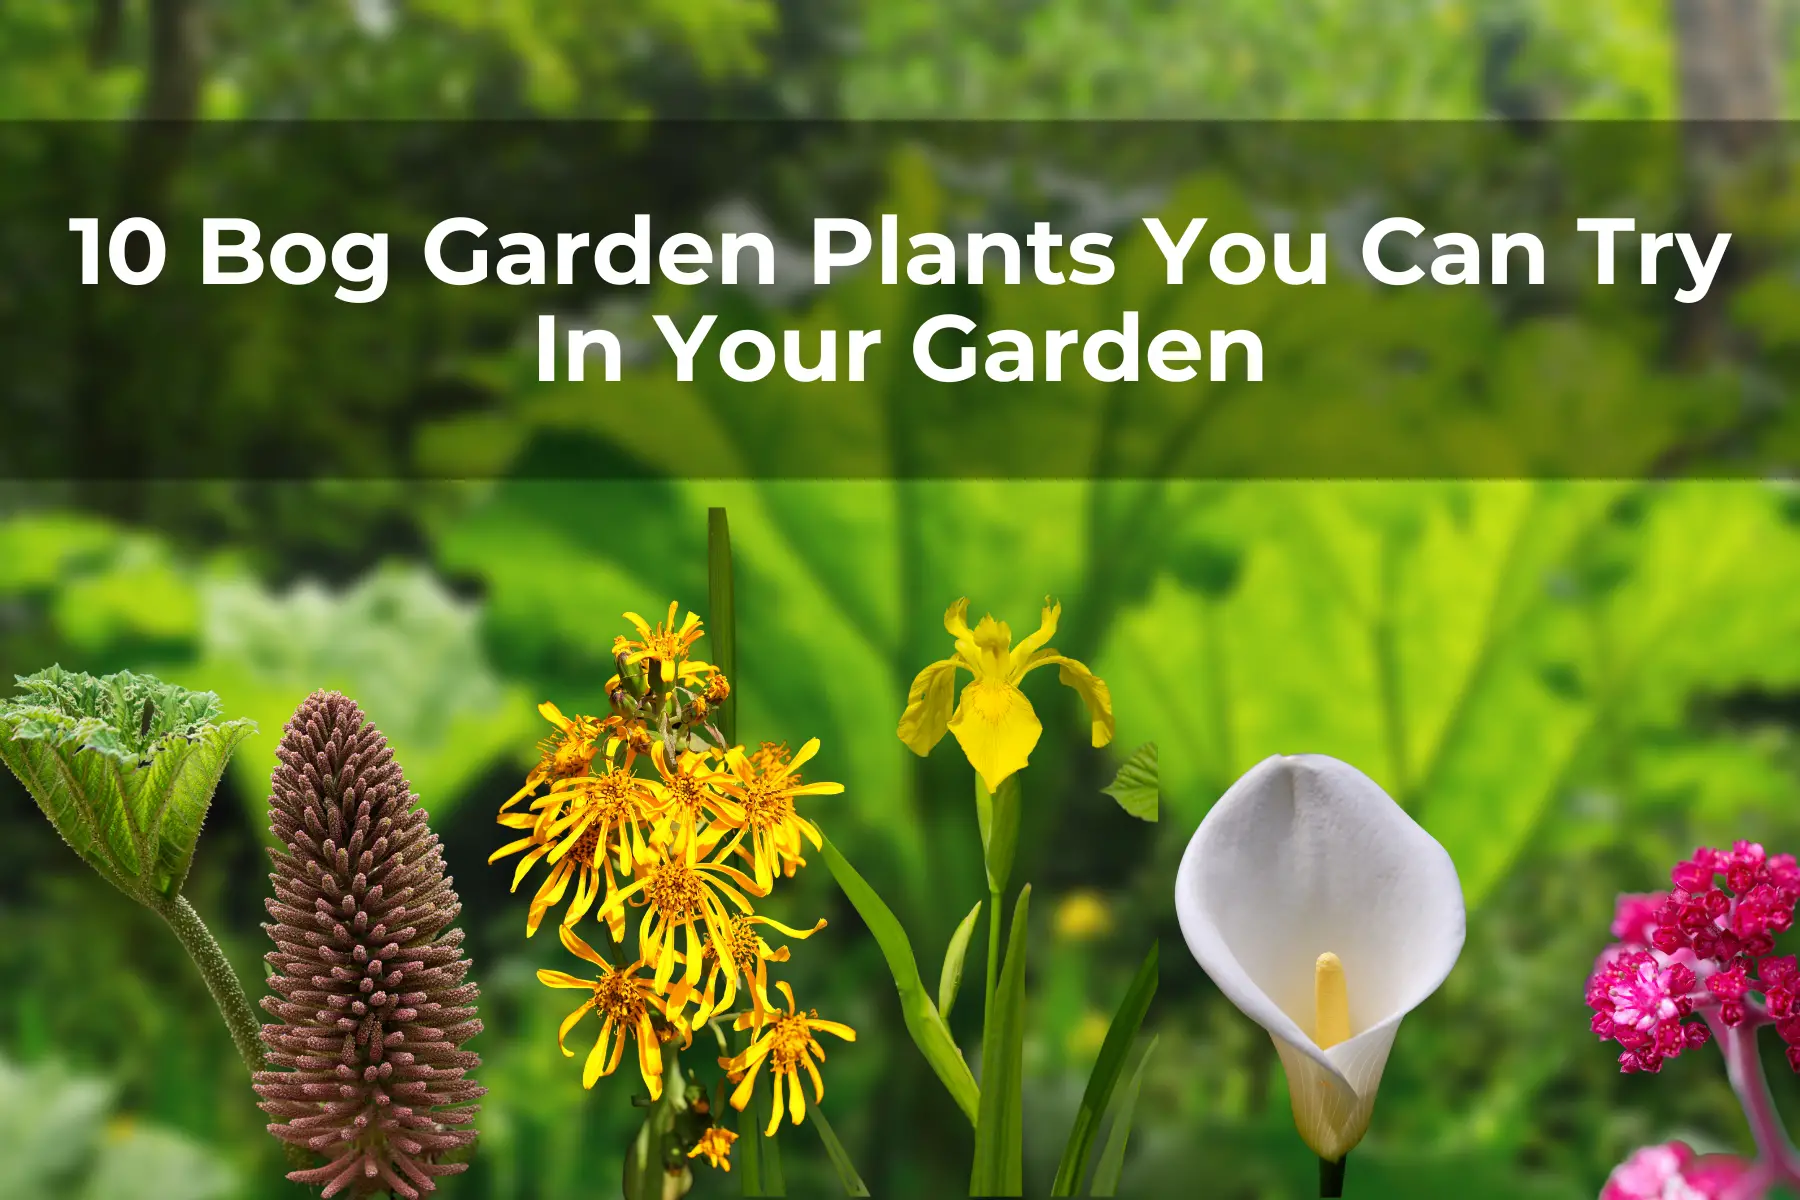 10 Bog Garden Plants You Can Try In Your Garden